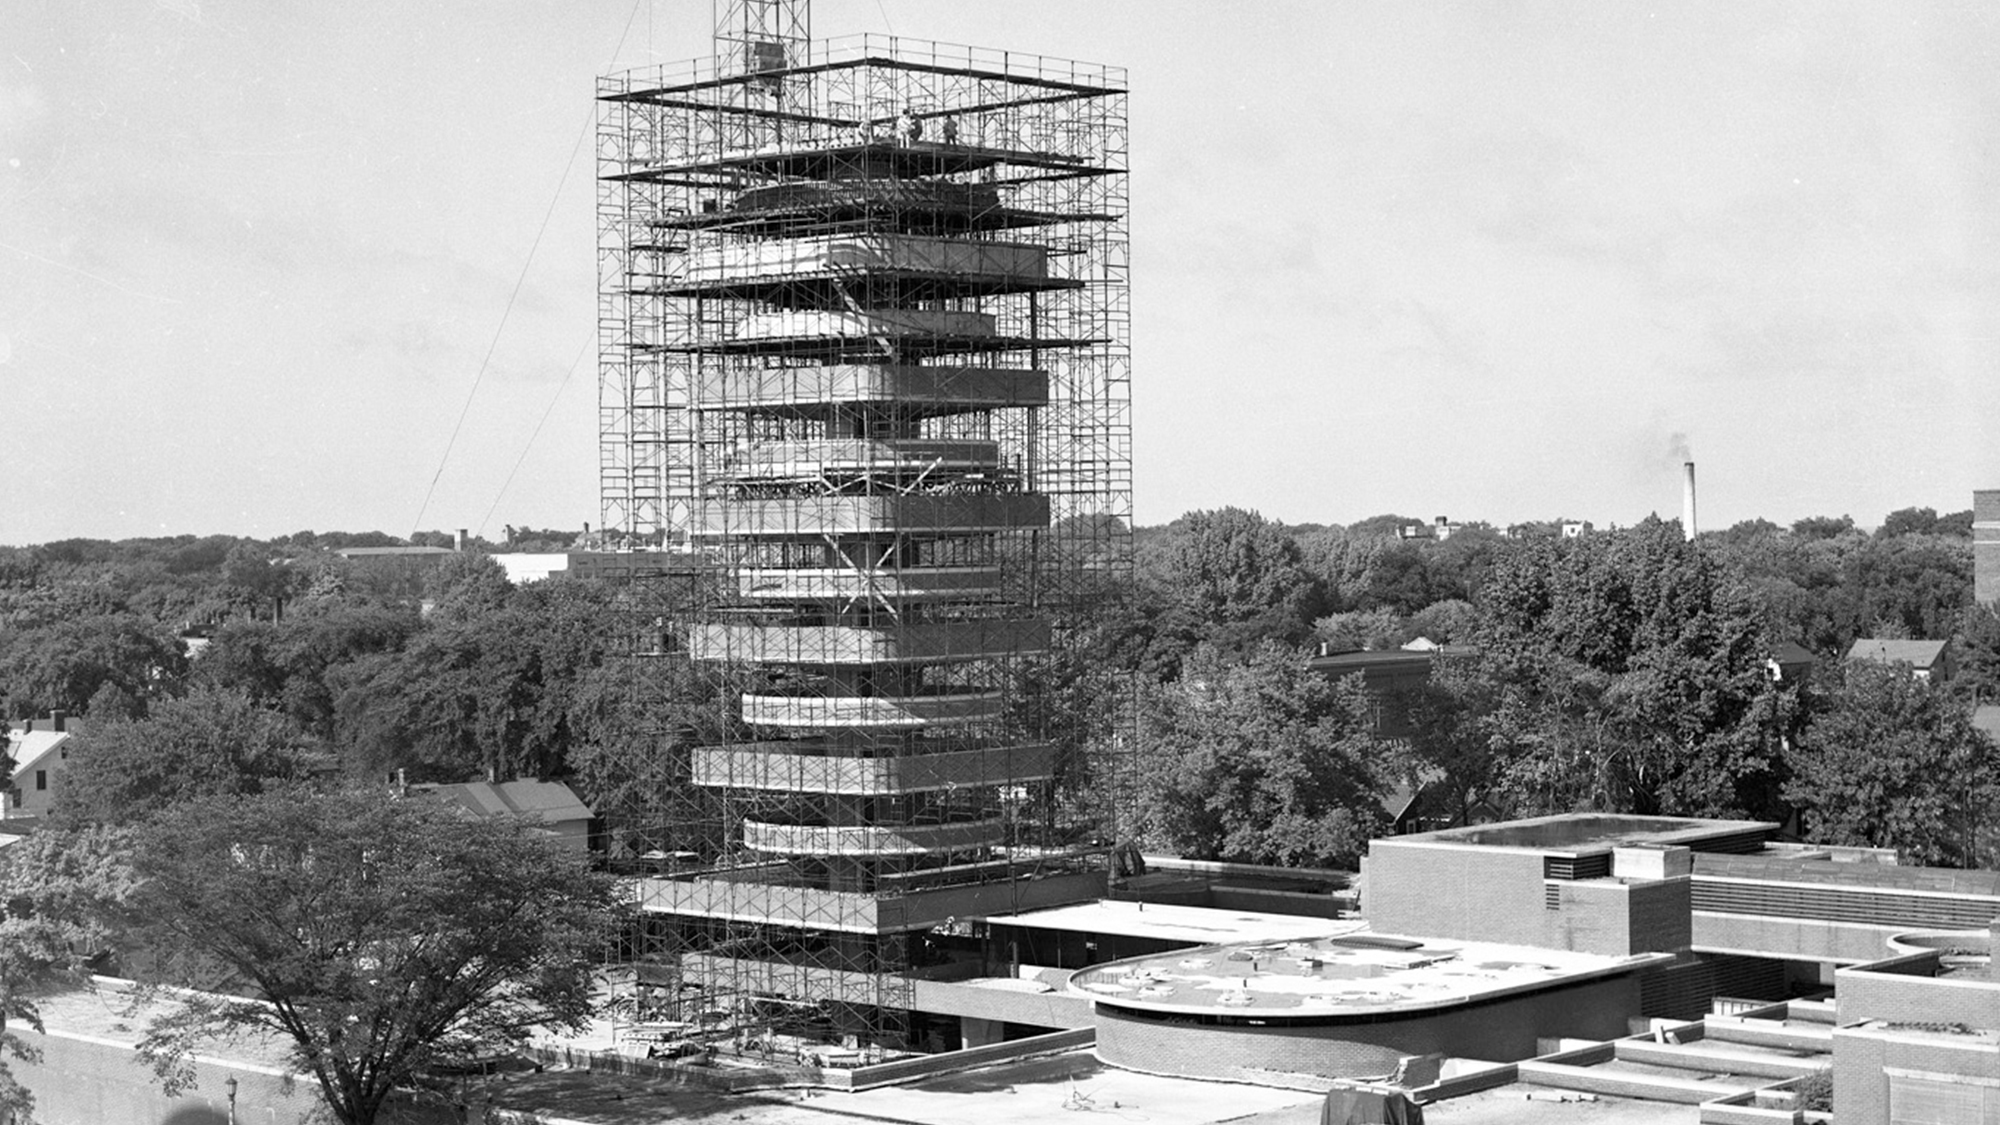 Construction begins on Frank Lloyd Wright’s famous building